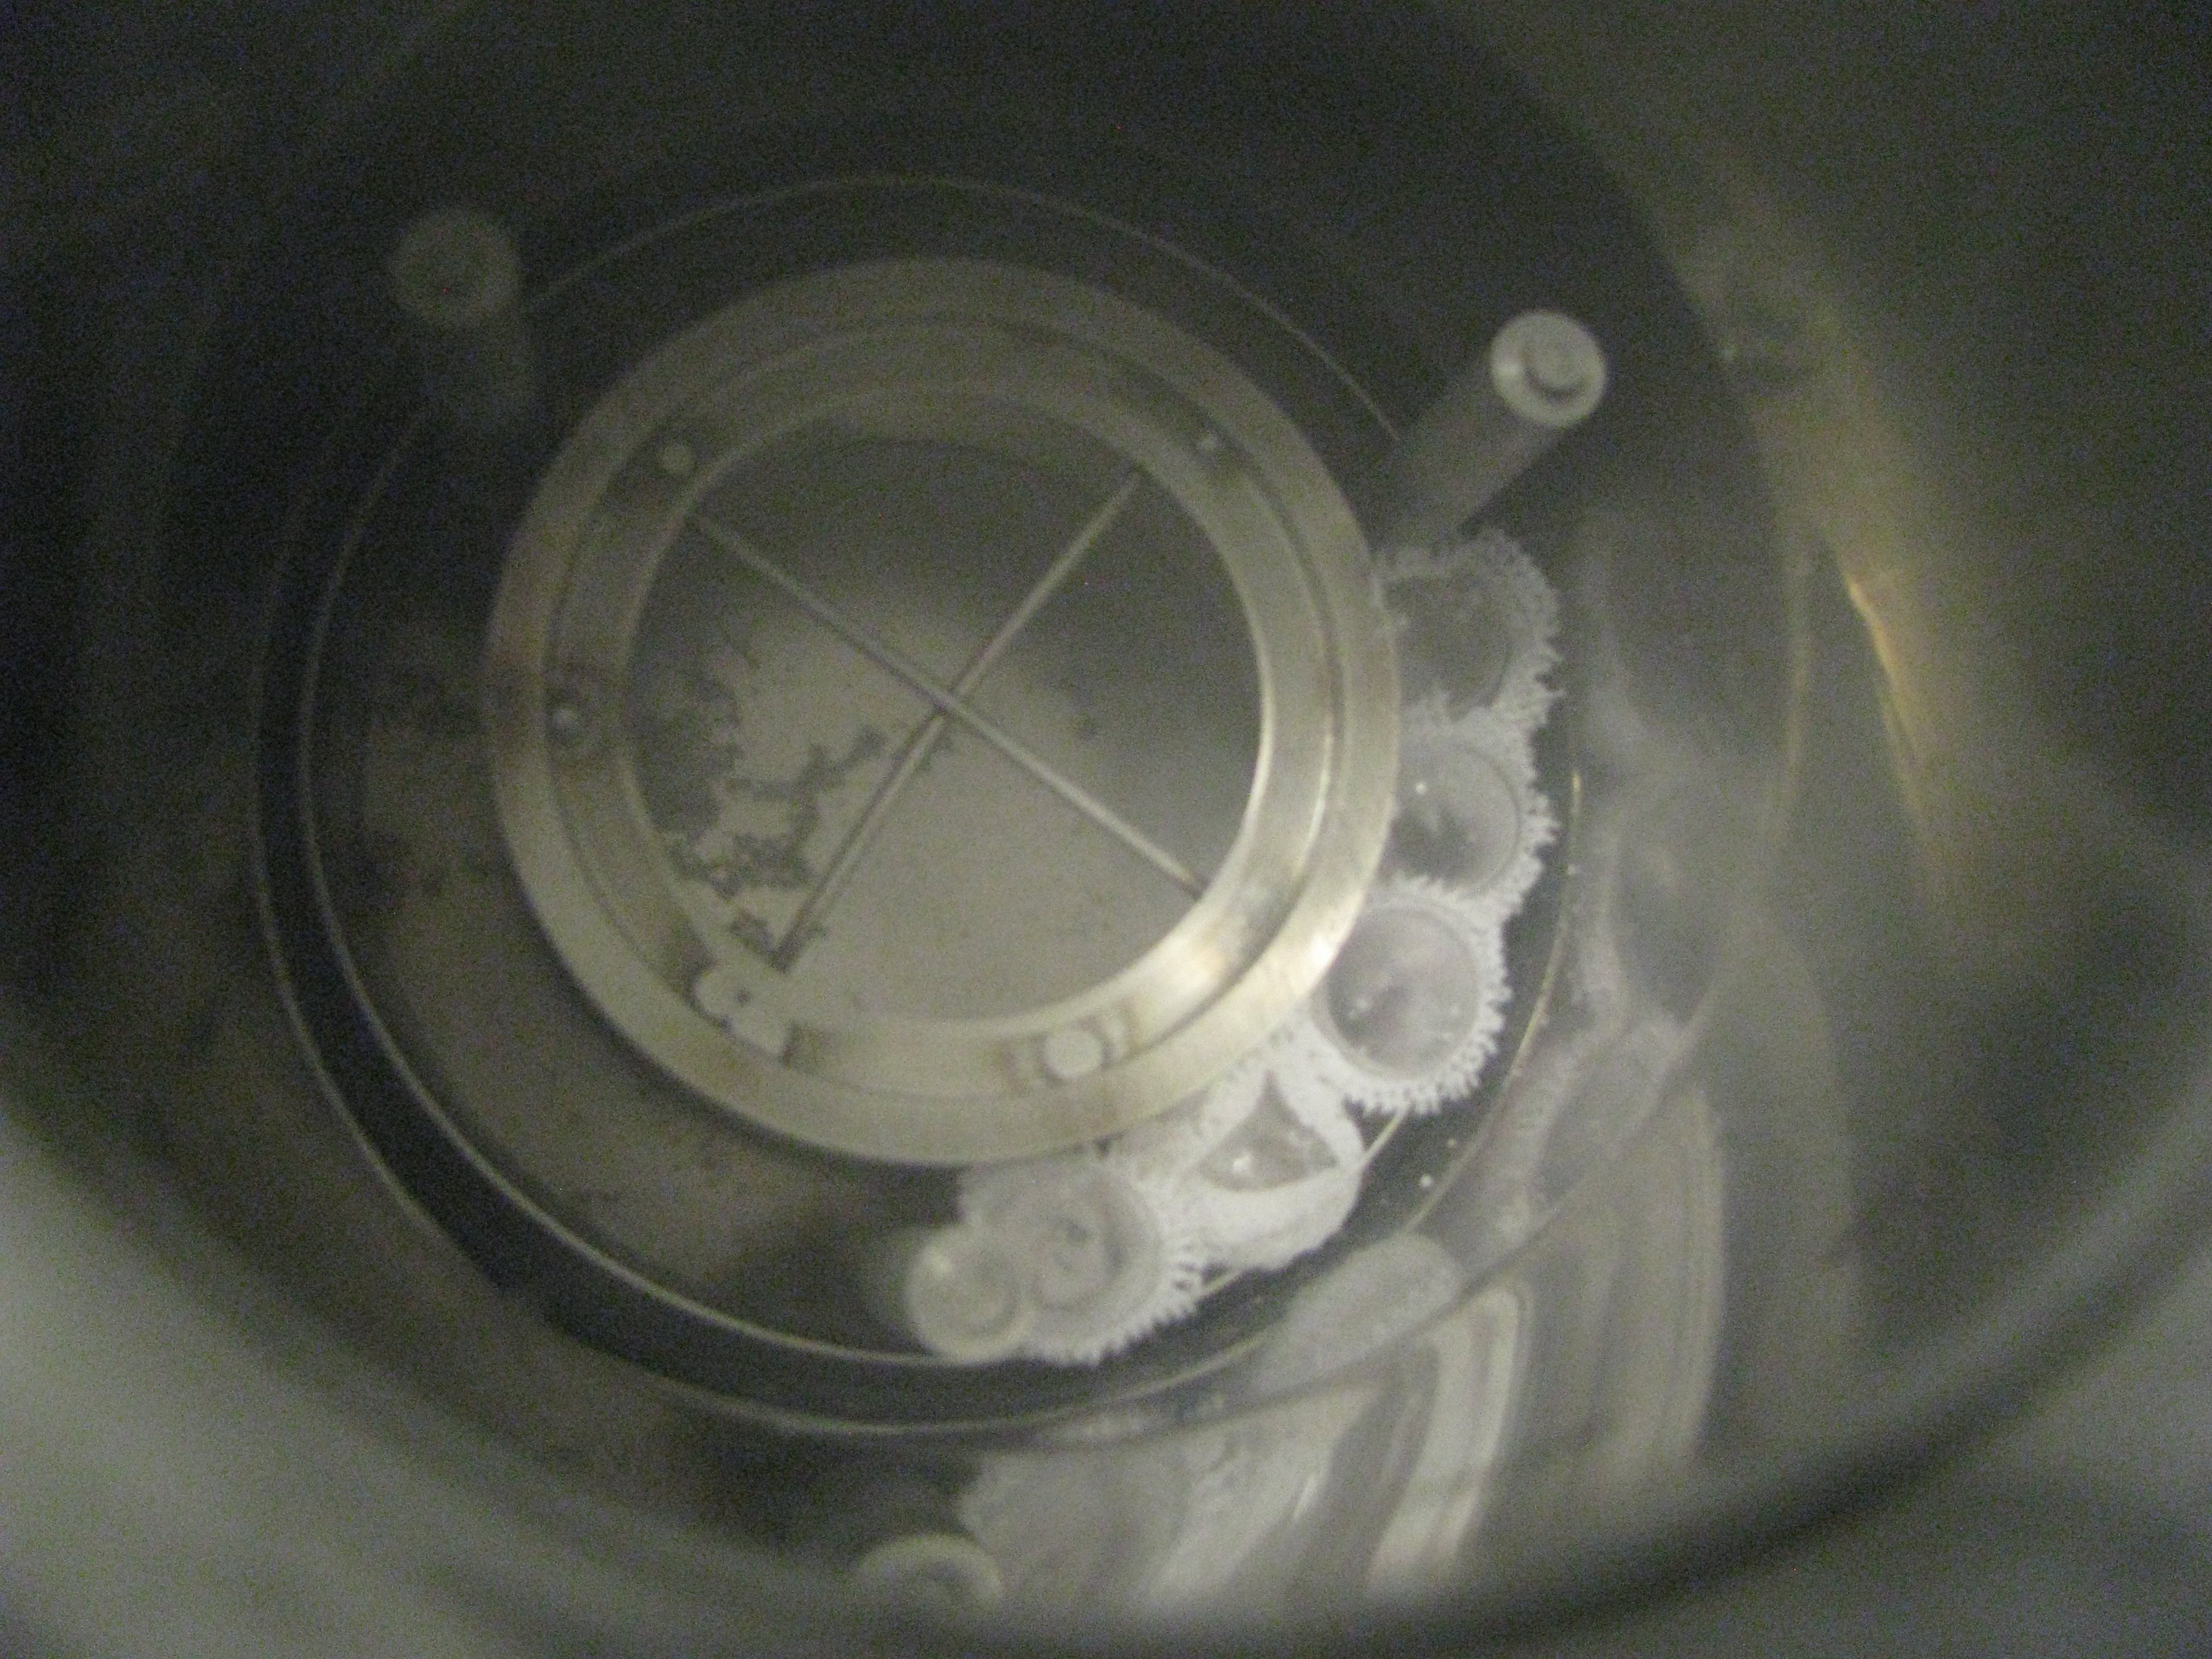 Image showing samples loaded in a dewar before being chilled with liquid nitrogen.